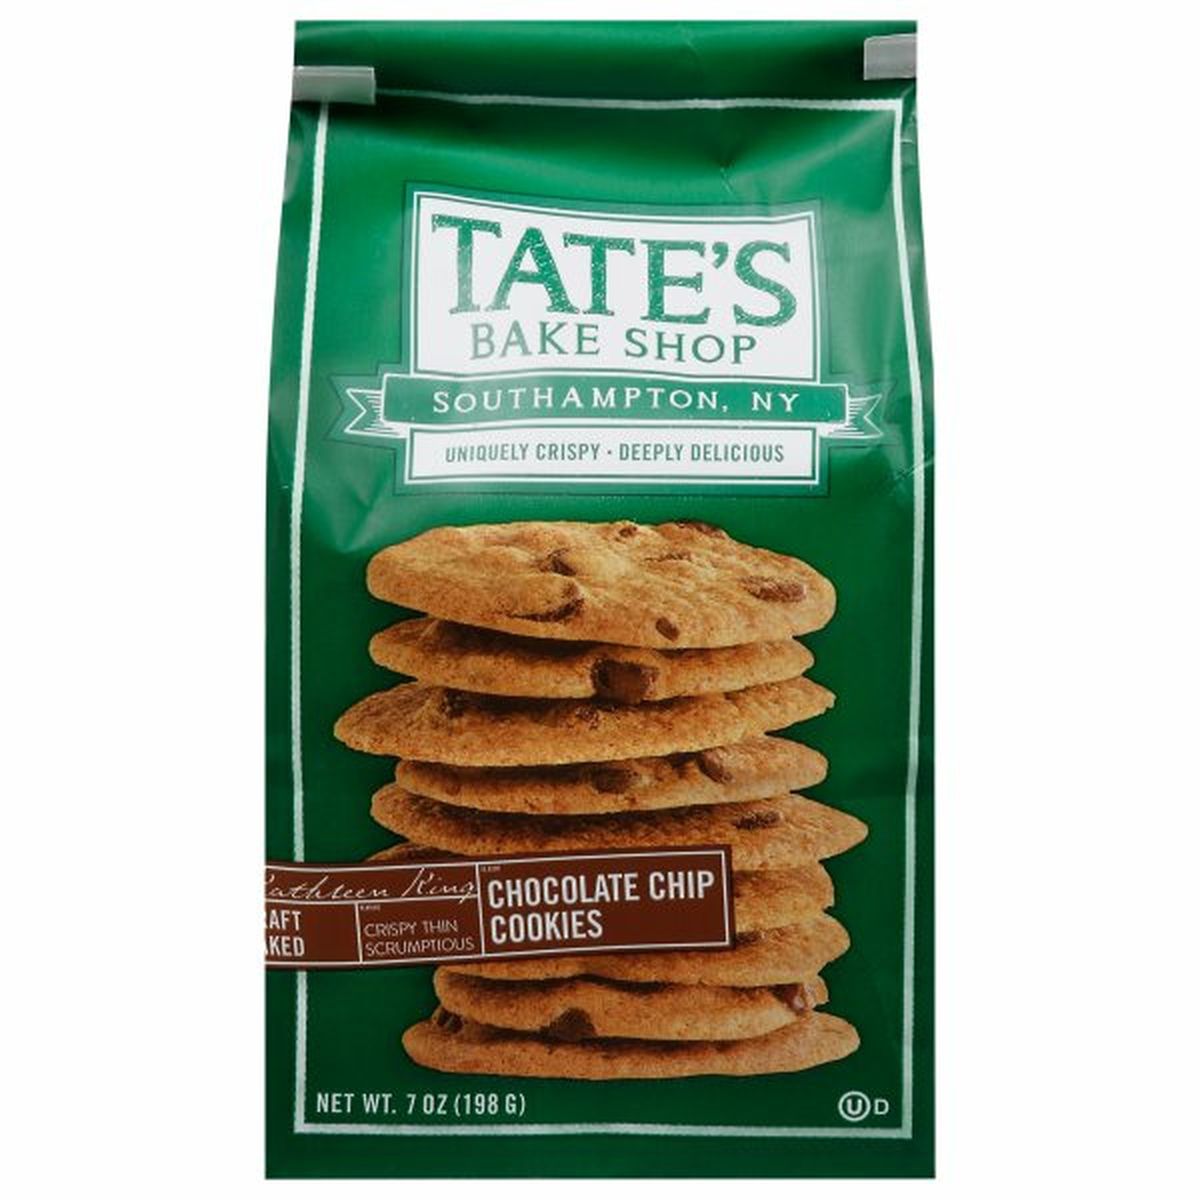 Calories in Tate's Bake Shop Cookies, Chocolate Chip